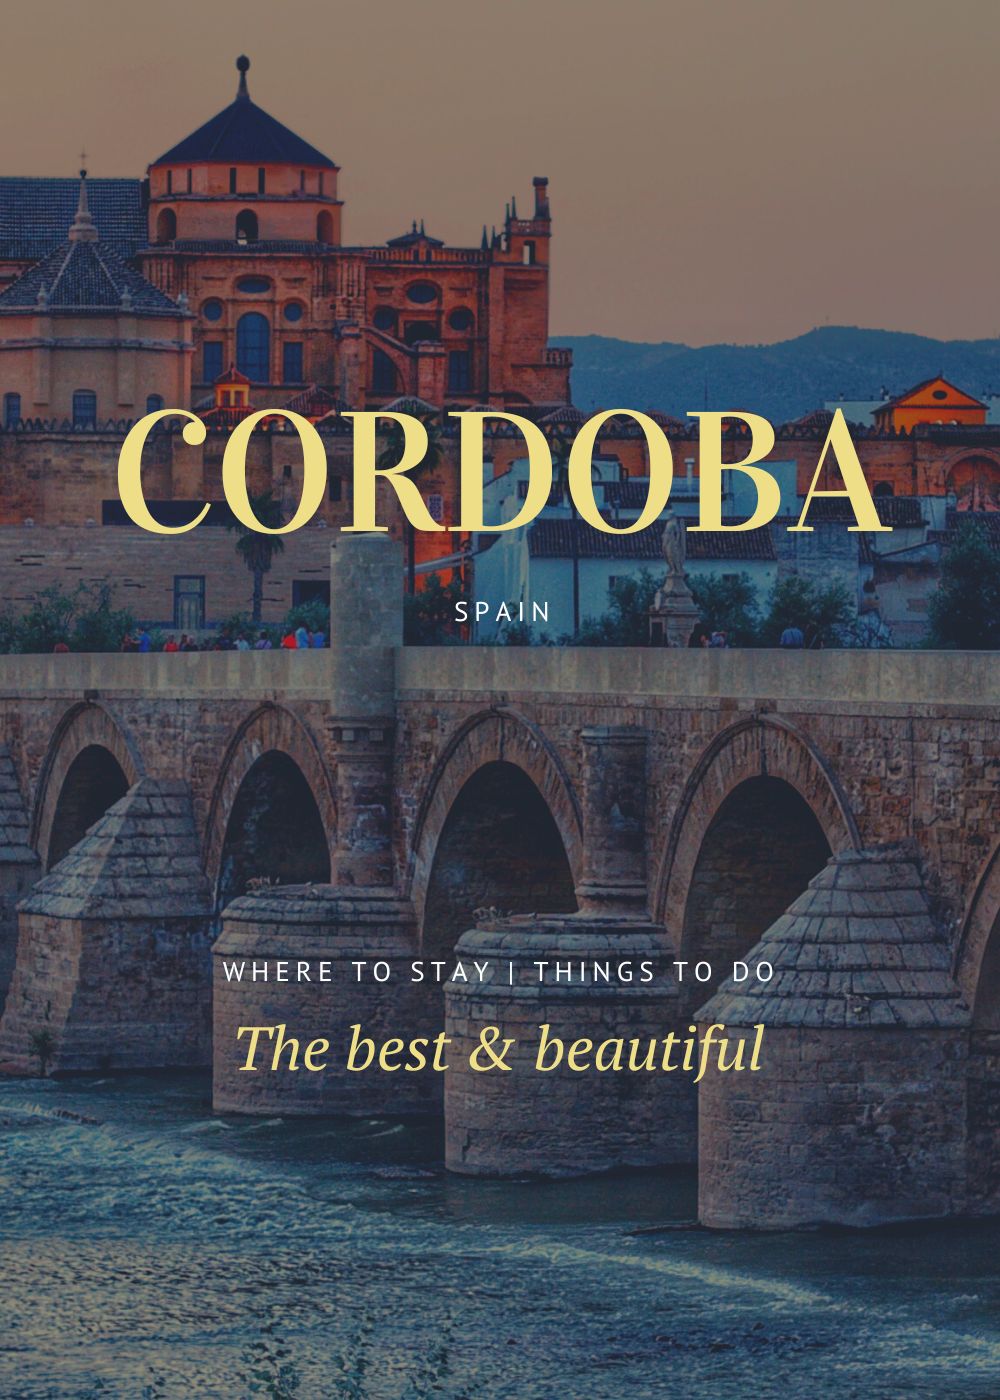 A Travel Guide Cordoba visit Cordoba why you should go where to stay when to go things to do